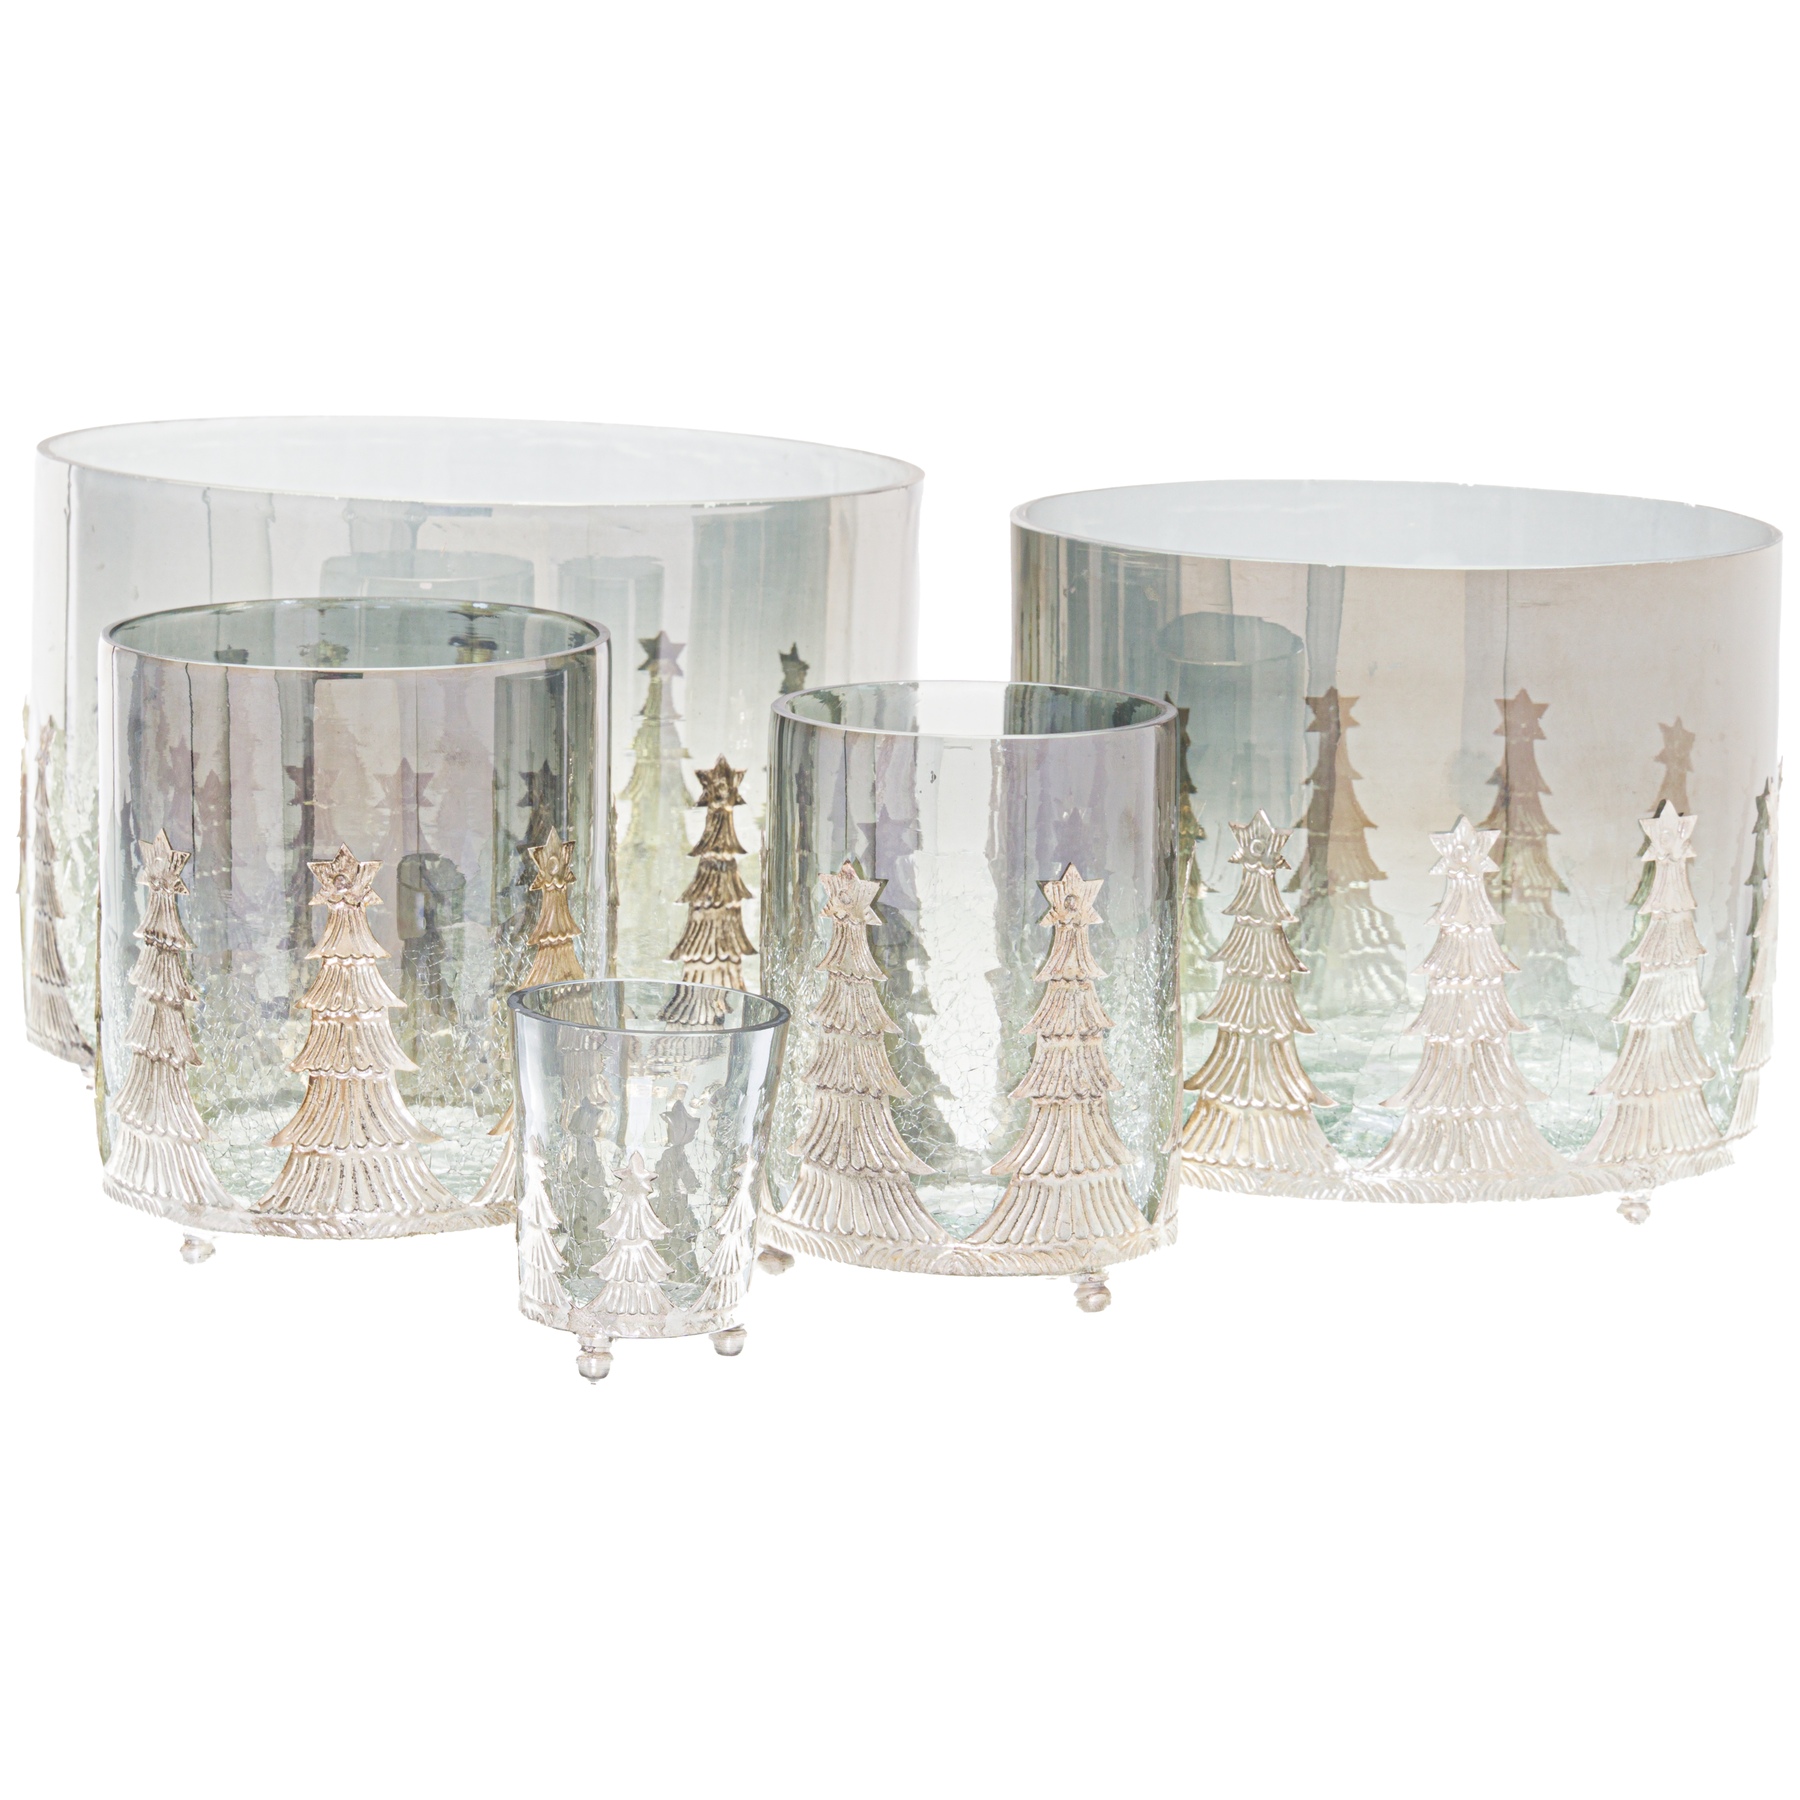 Noel Collection Medium Christmas Tree Crackled Candle Holder - Image 2